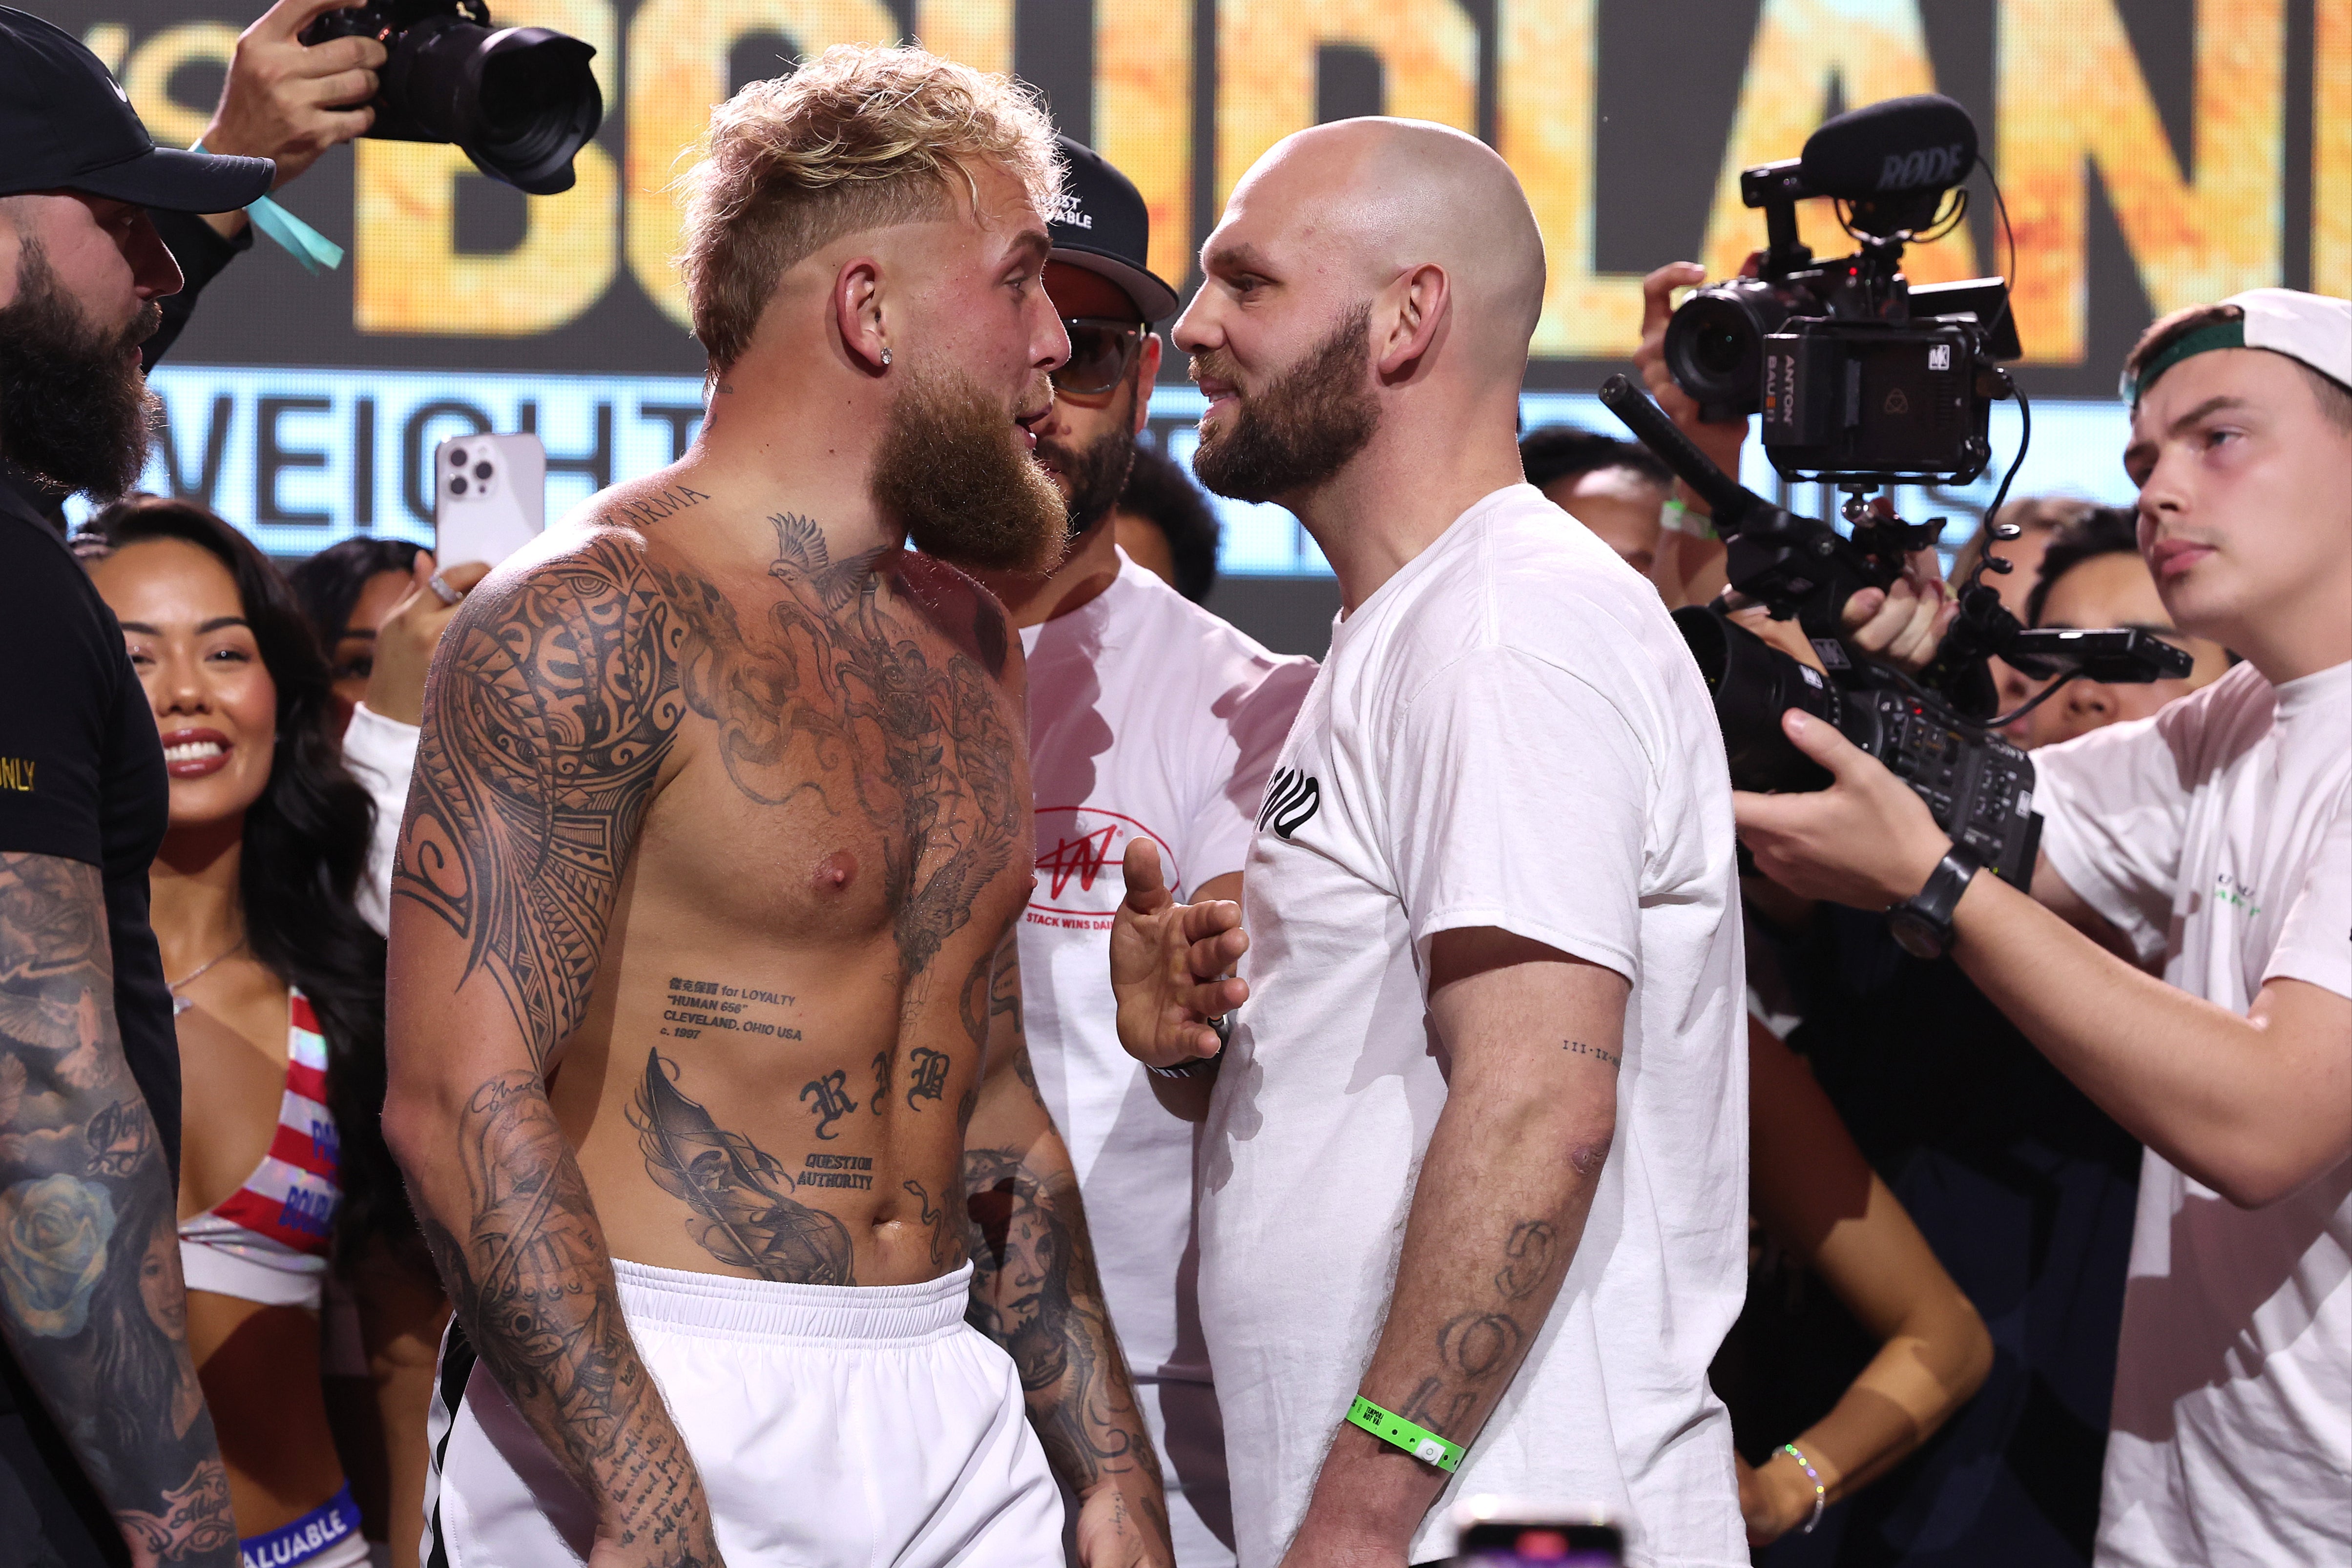 Jake Paul (left) and Ryan Bourland face off during their weigh-in